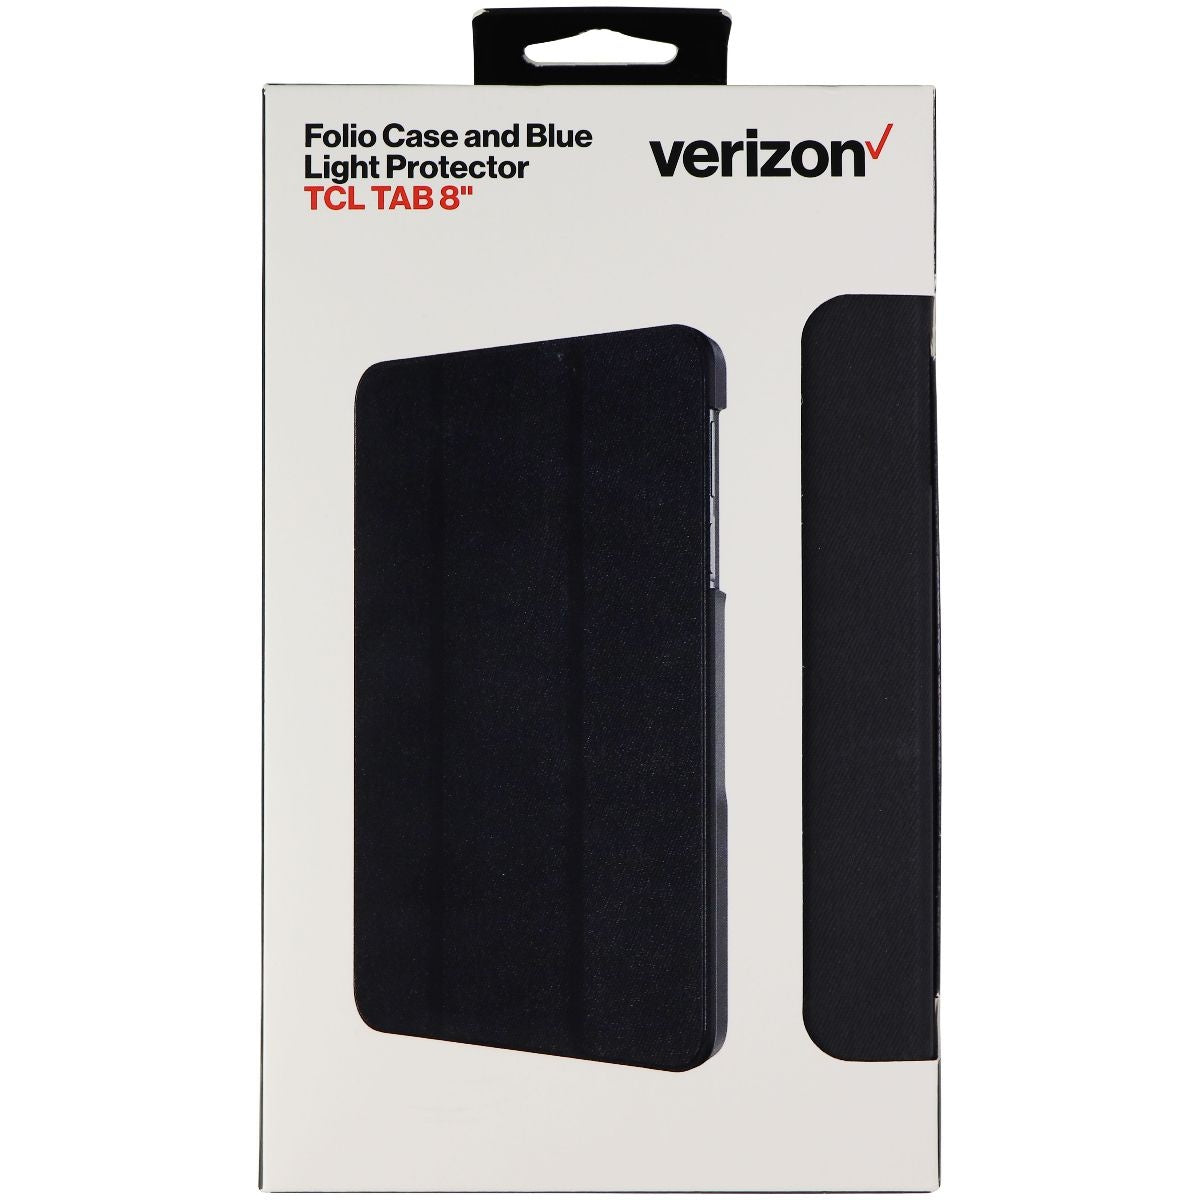 Verizon Hardshell Folio Case and Screen Protector for TCL Tab 8-inch - Black iPad/Tablet Accessories - Cases, Covers, Keyboard Folios Verizon    - Simple Cell Bulk Wholesale Pricing - USA Seller